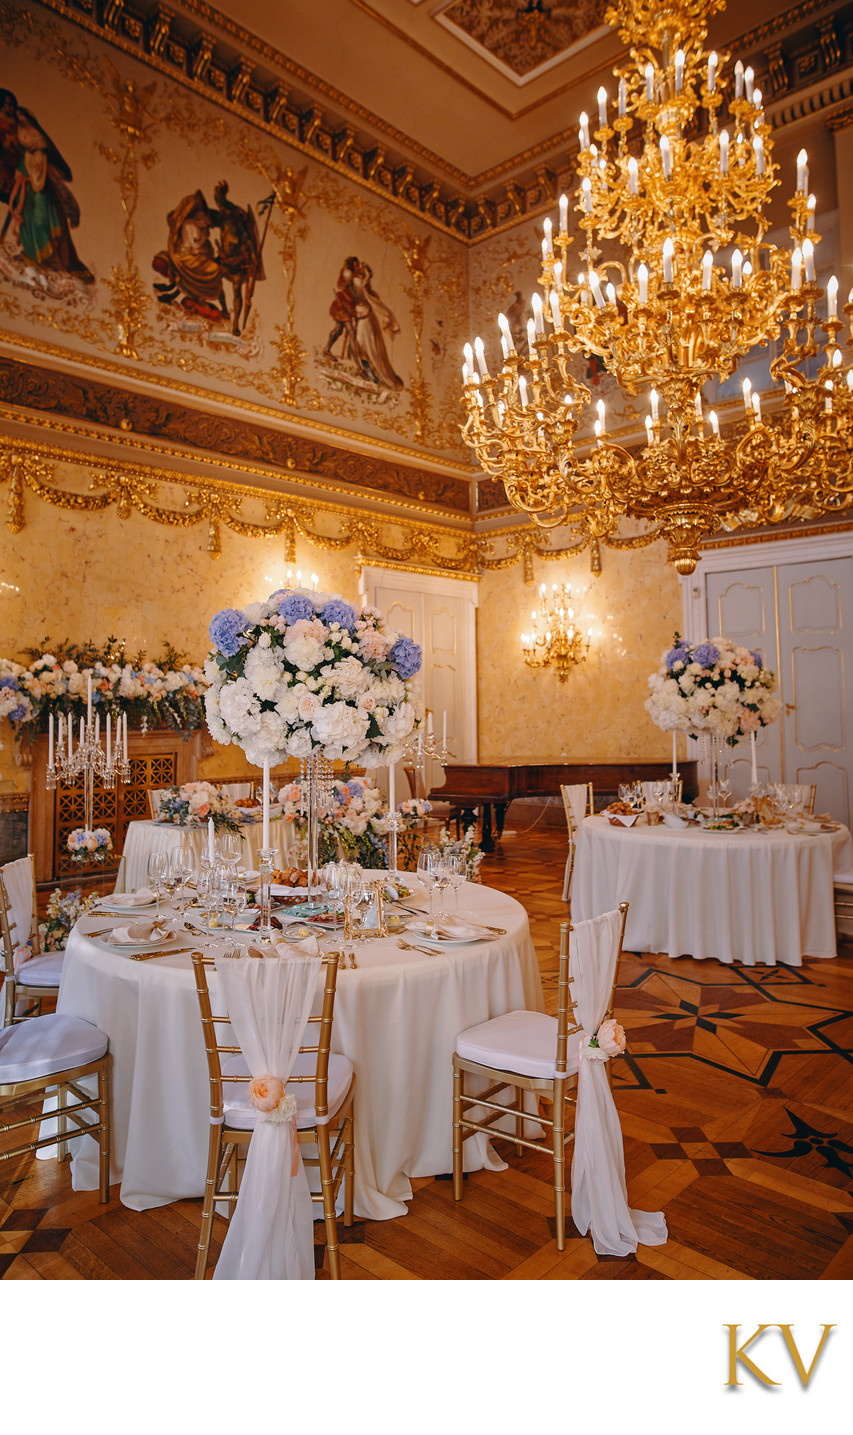 The table set up and design at the Kaunicky Palace 